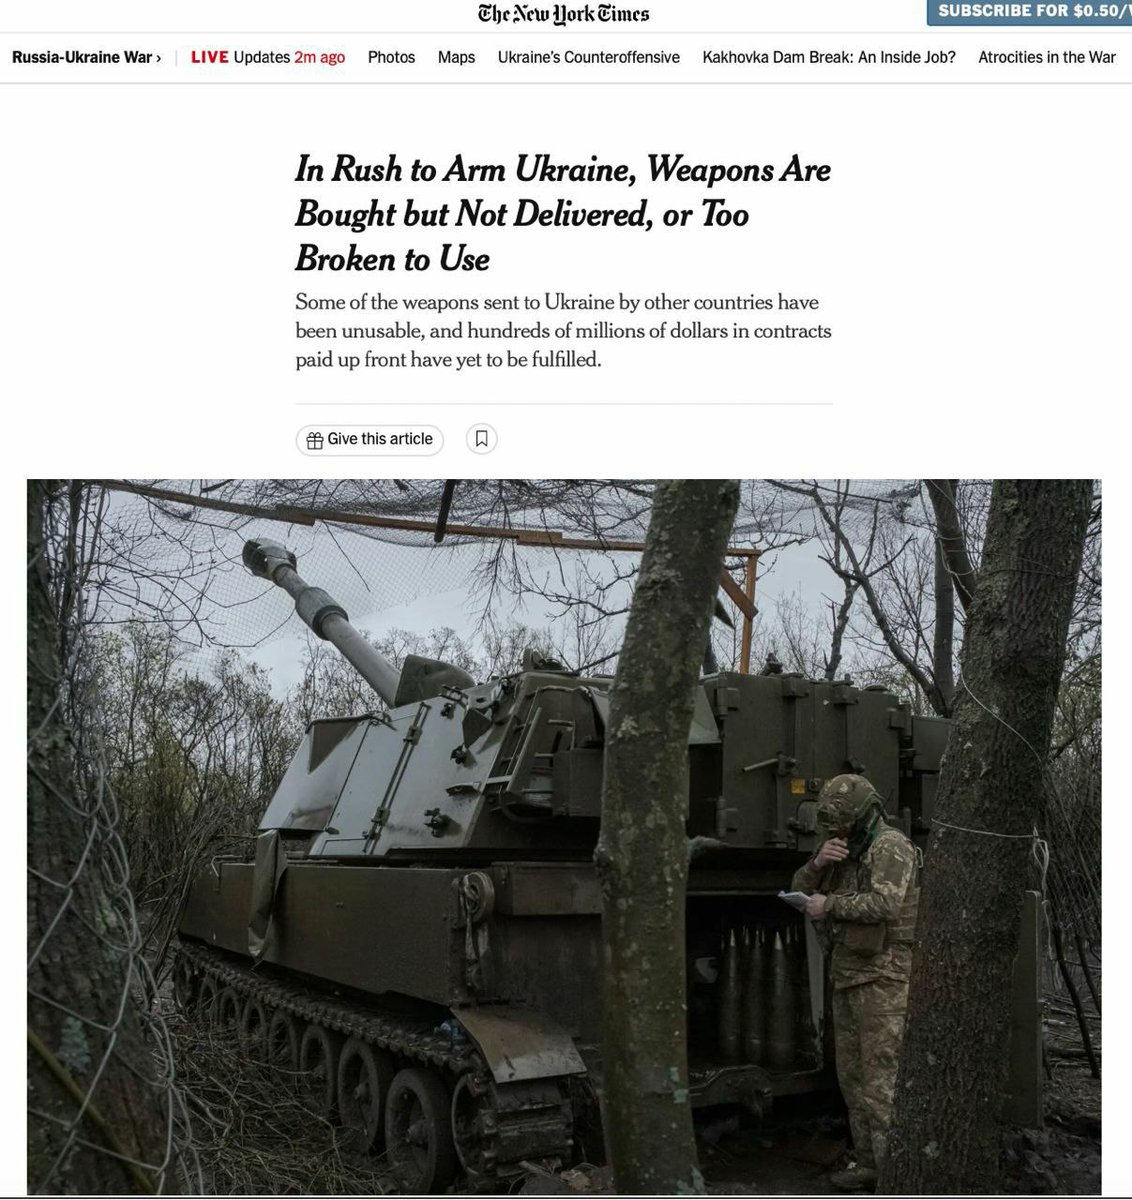 NYT: 'Ukraine has not been delivered some of the weapons it bought, and some of the weapons donated are unusable'

As of the end of 2022, Kiev had paid over 800 million dollars to arms suppliers under contracts that had not been fully or partially fulfilled.